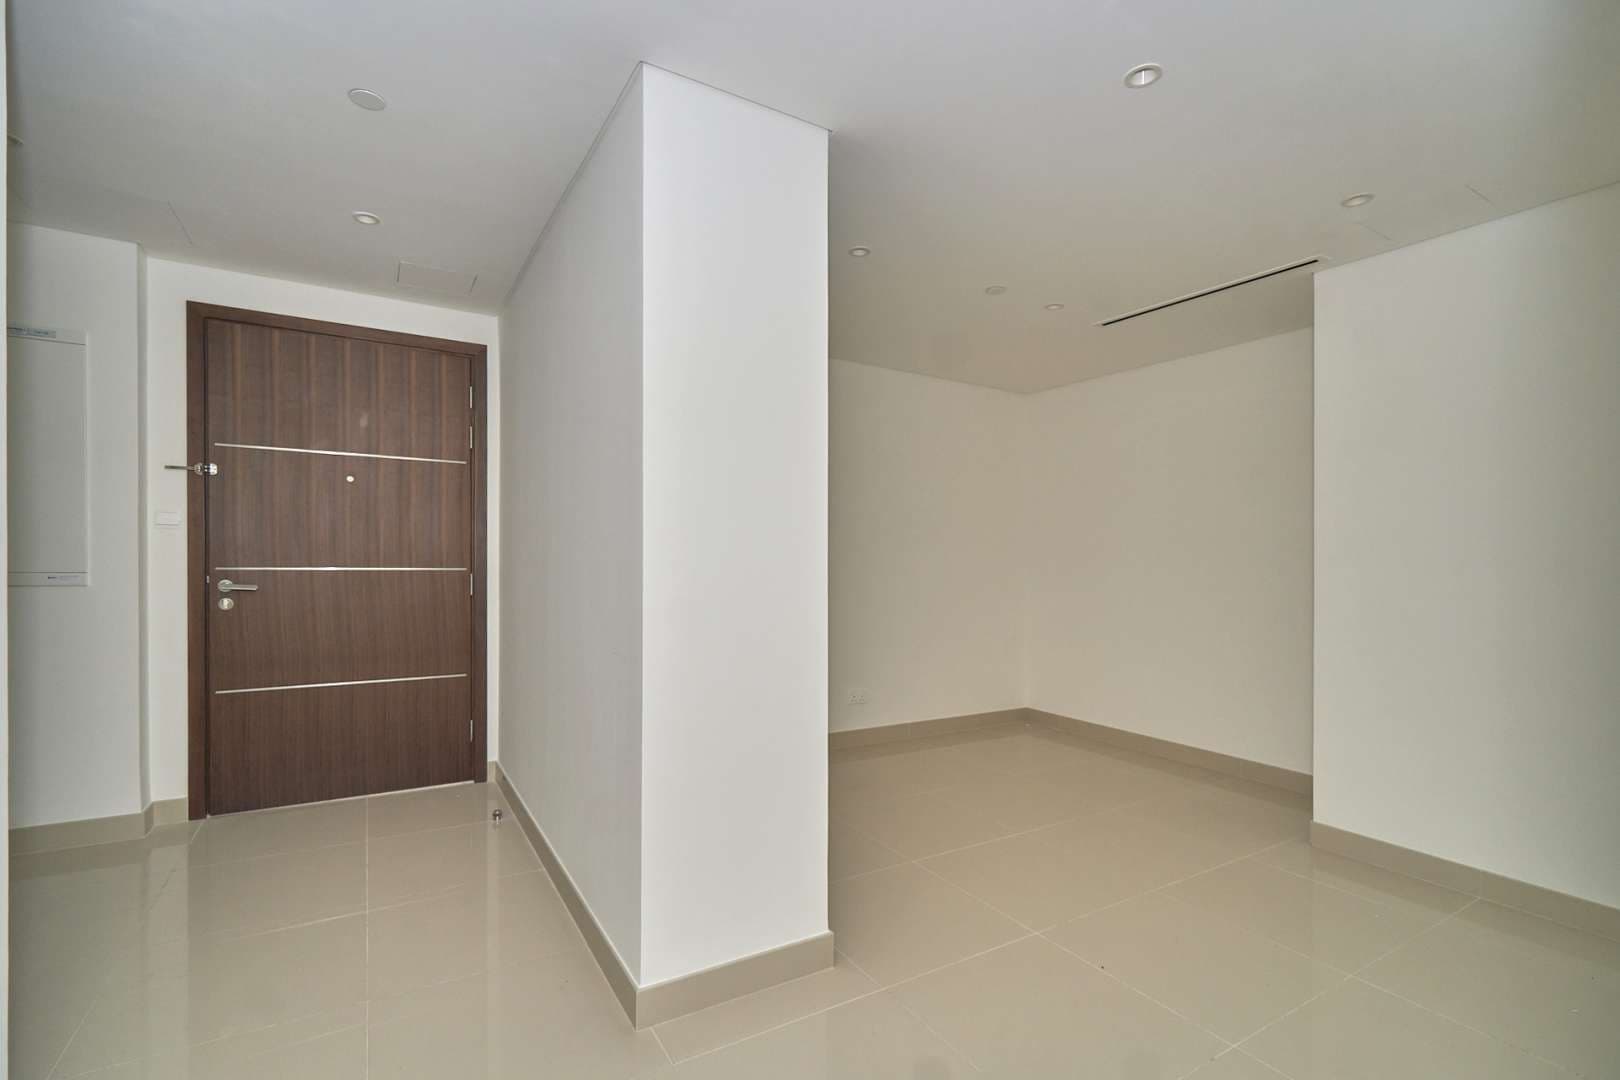 1 Bedroom Apartment For Sale Boulevard Point Lp08213 199c7b065a30be00.jpg